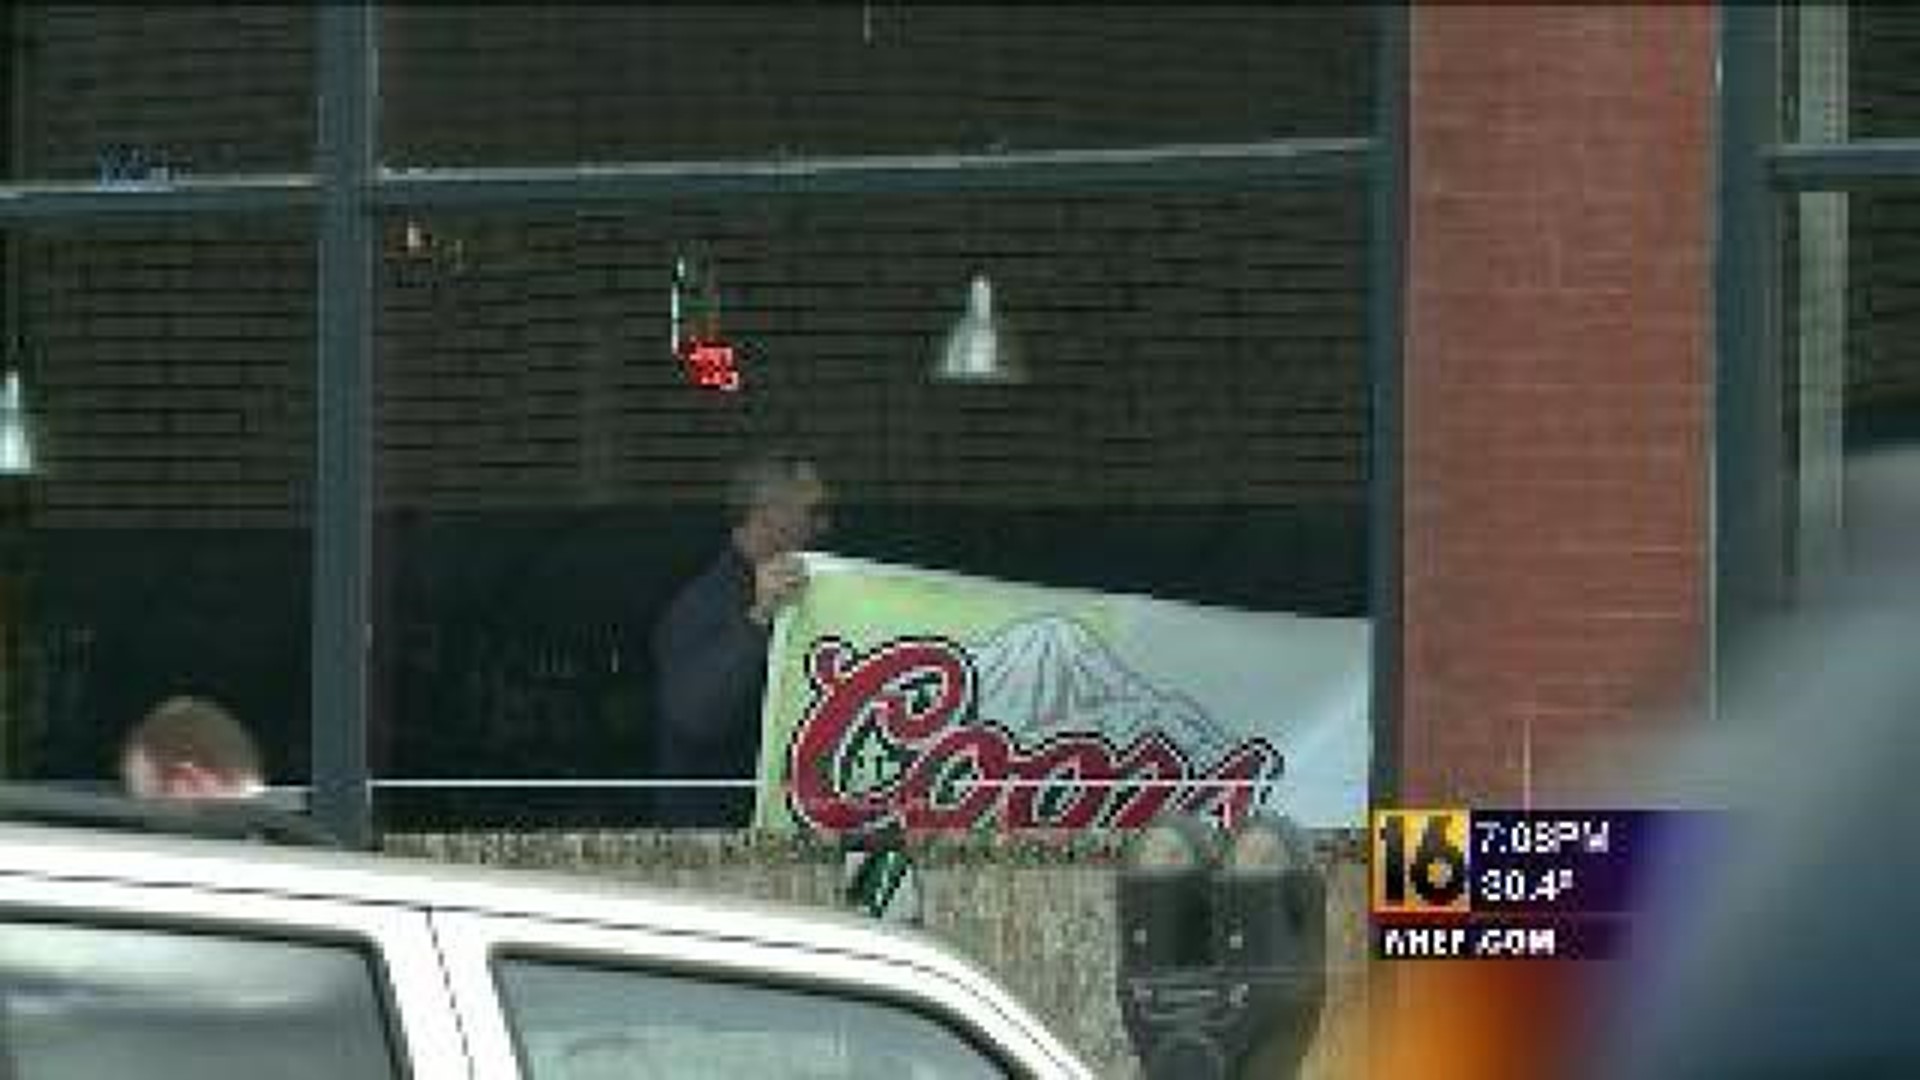 Shuttered Bars A Concern for Scranton, Other Owners